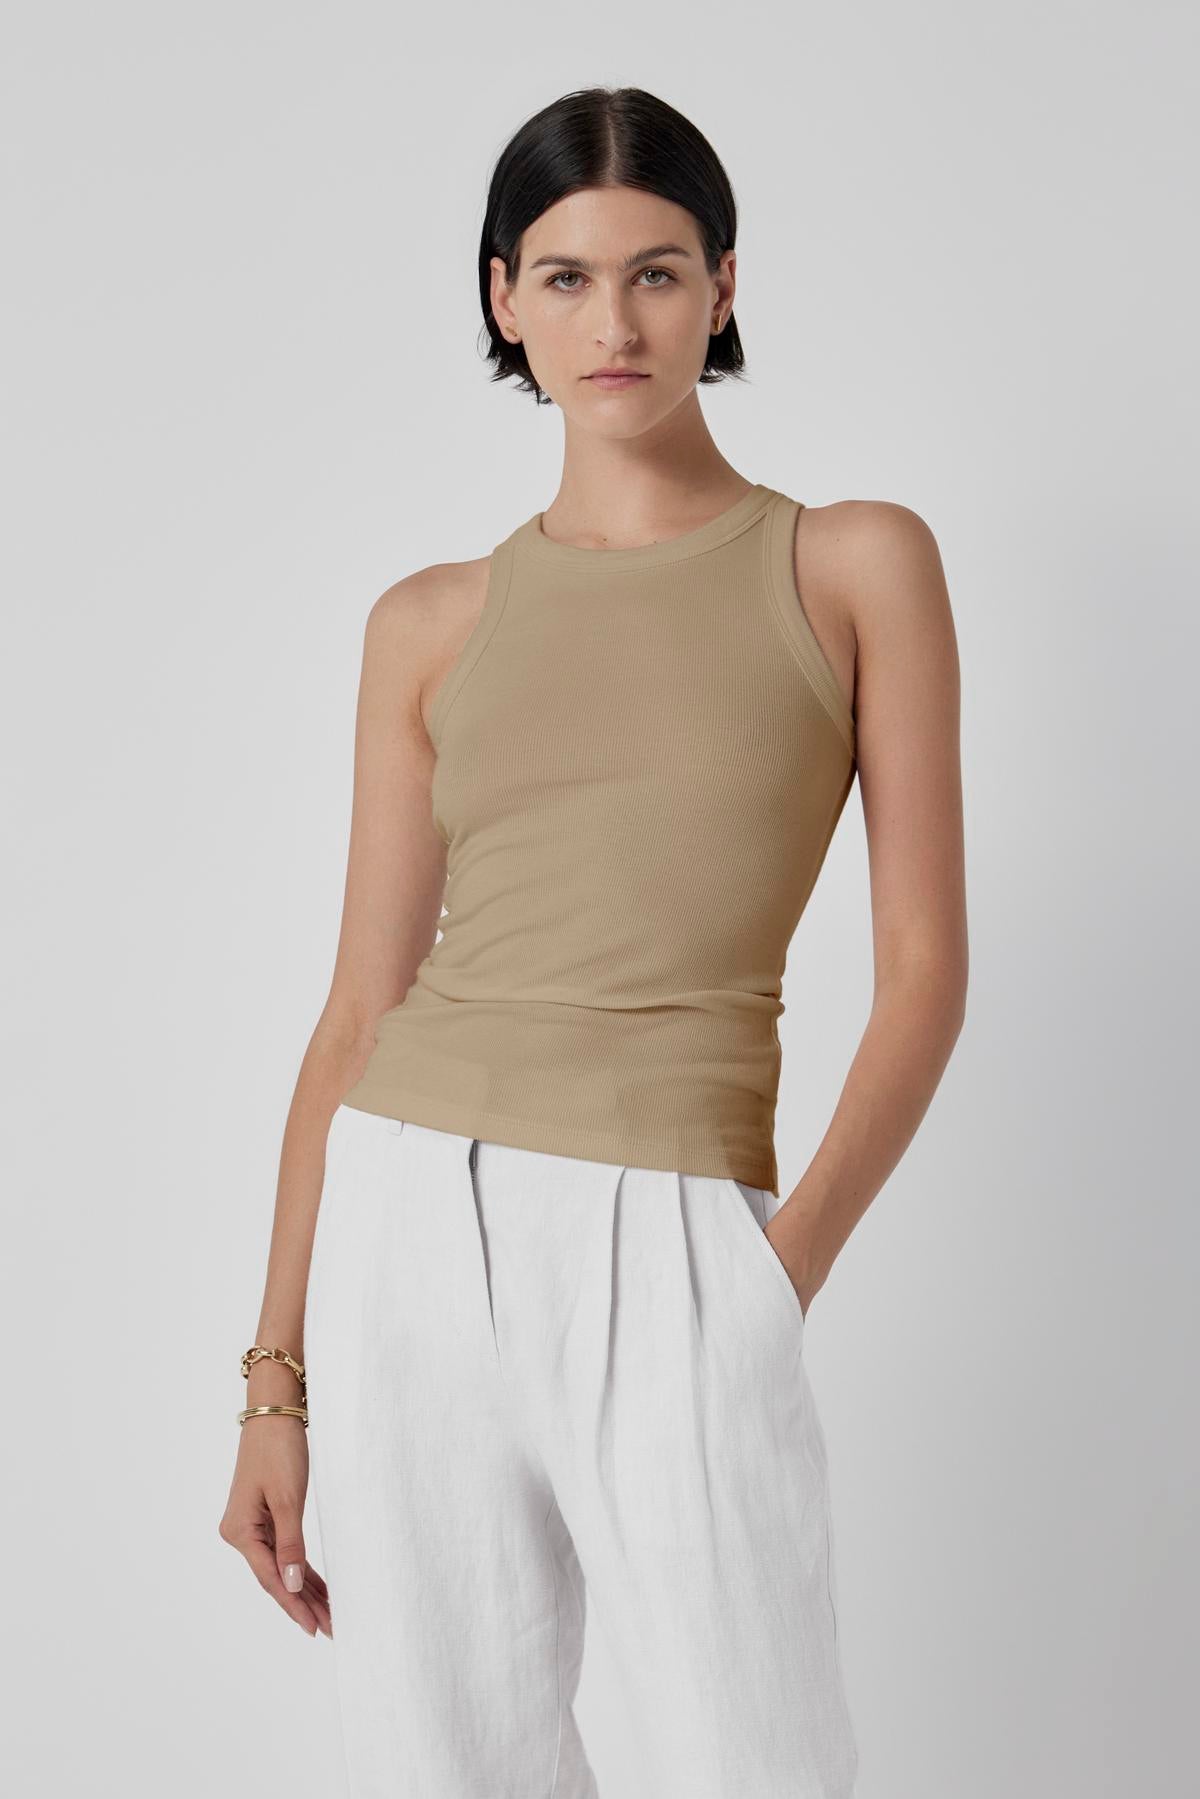   A woman in a beige Velvet by Jenny Graham Cruz tank top and chic white trousers against a light background. 